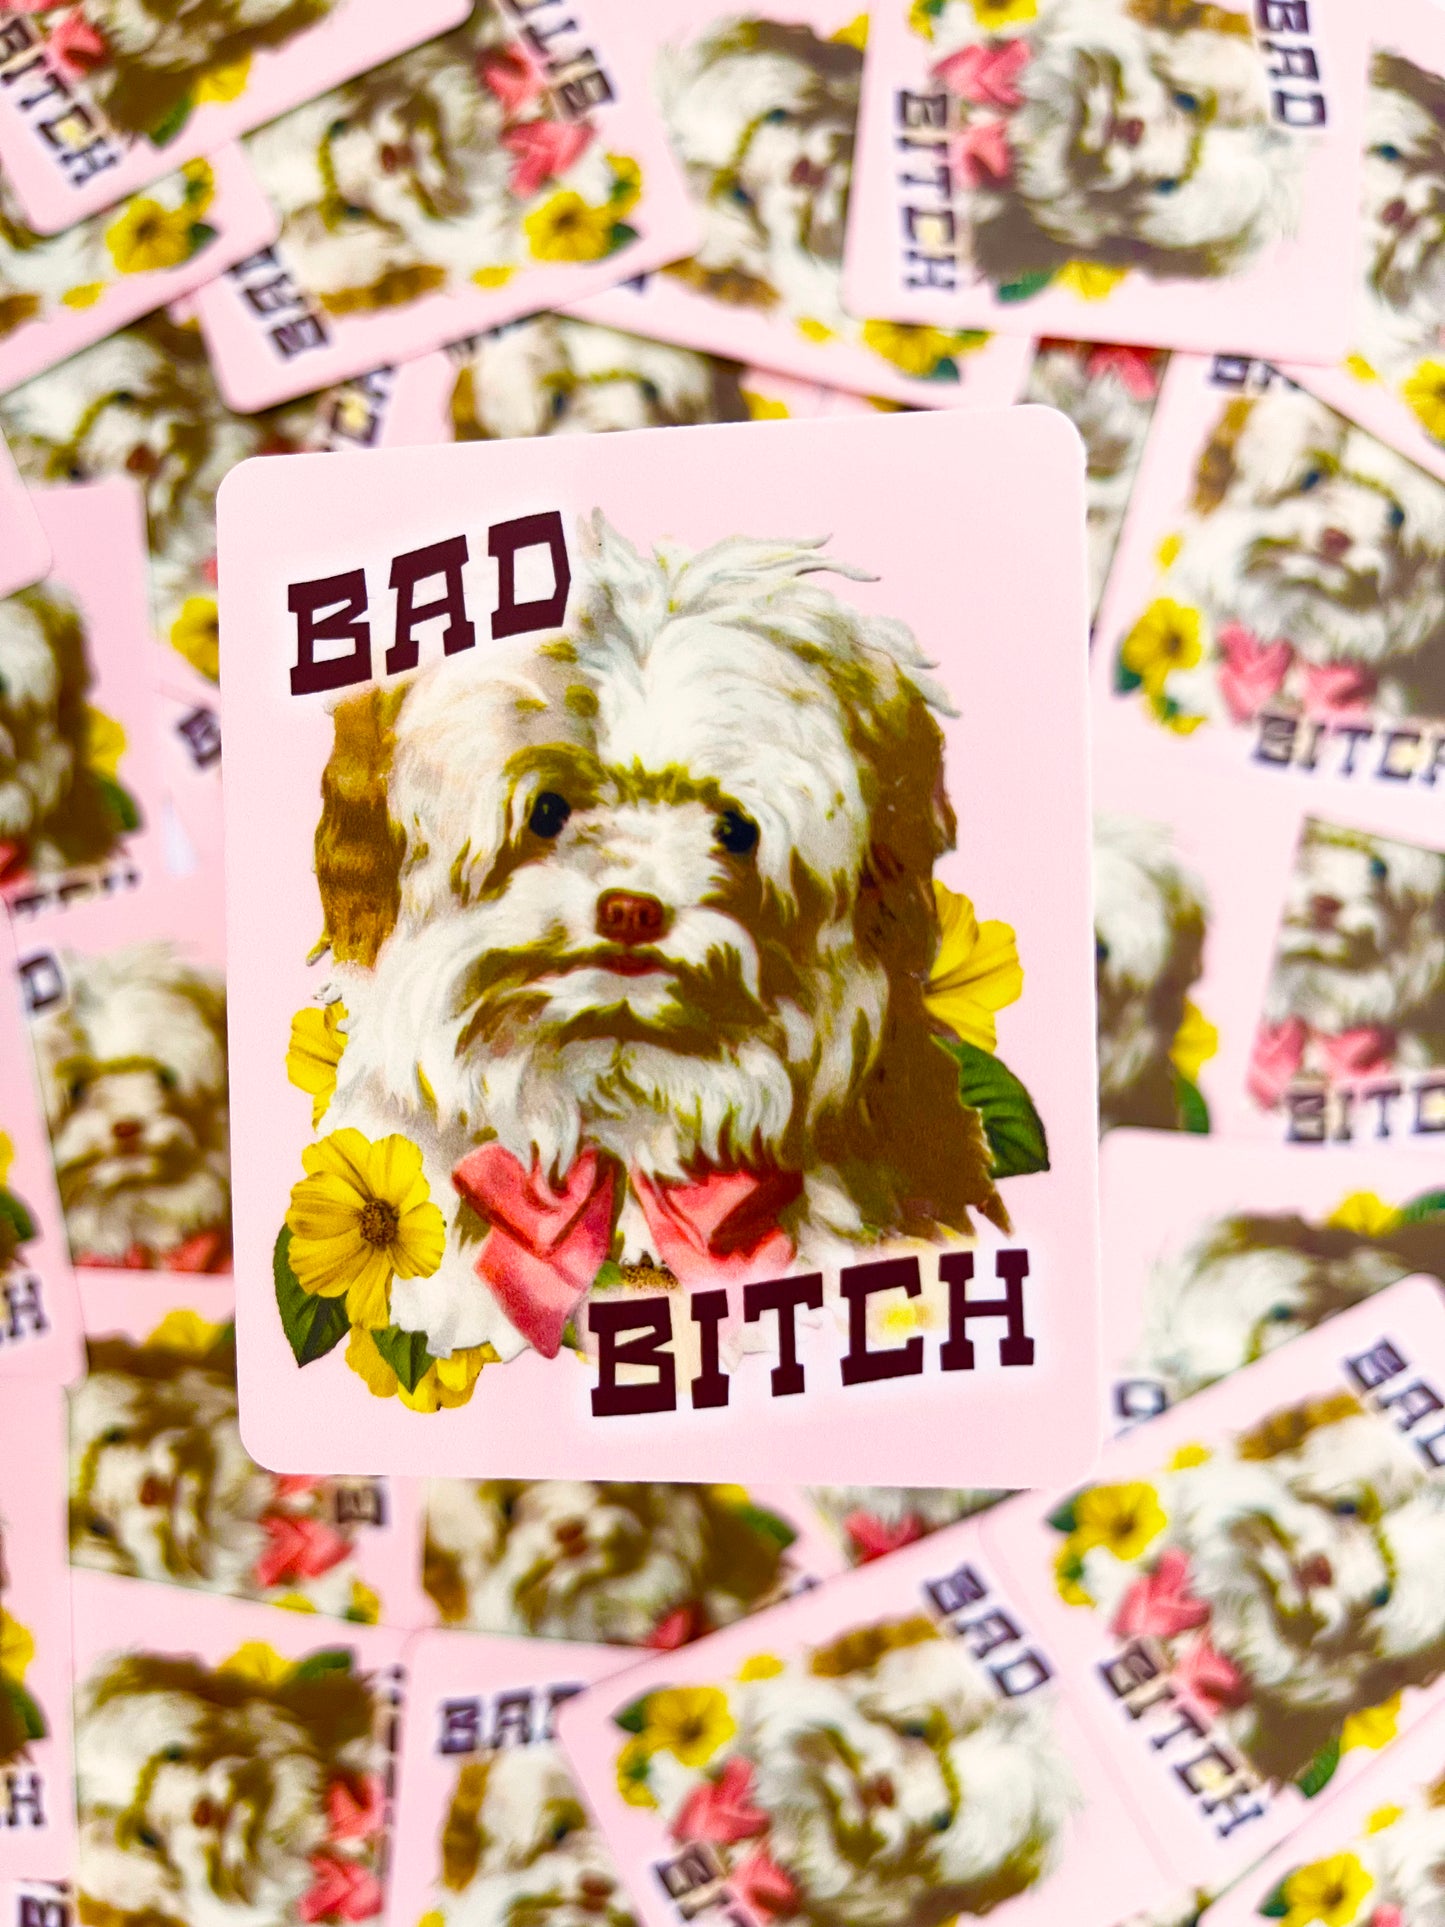 funny sticker with puppy dog bad bitch cute dog sticker decals with flowers retro style stickers coin laundry funny stickers